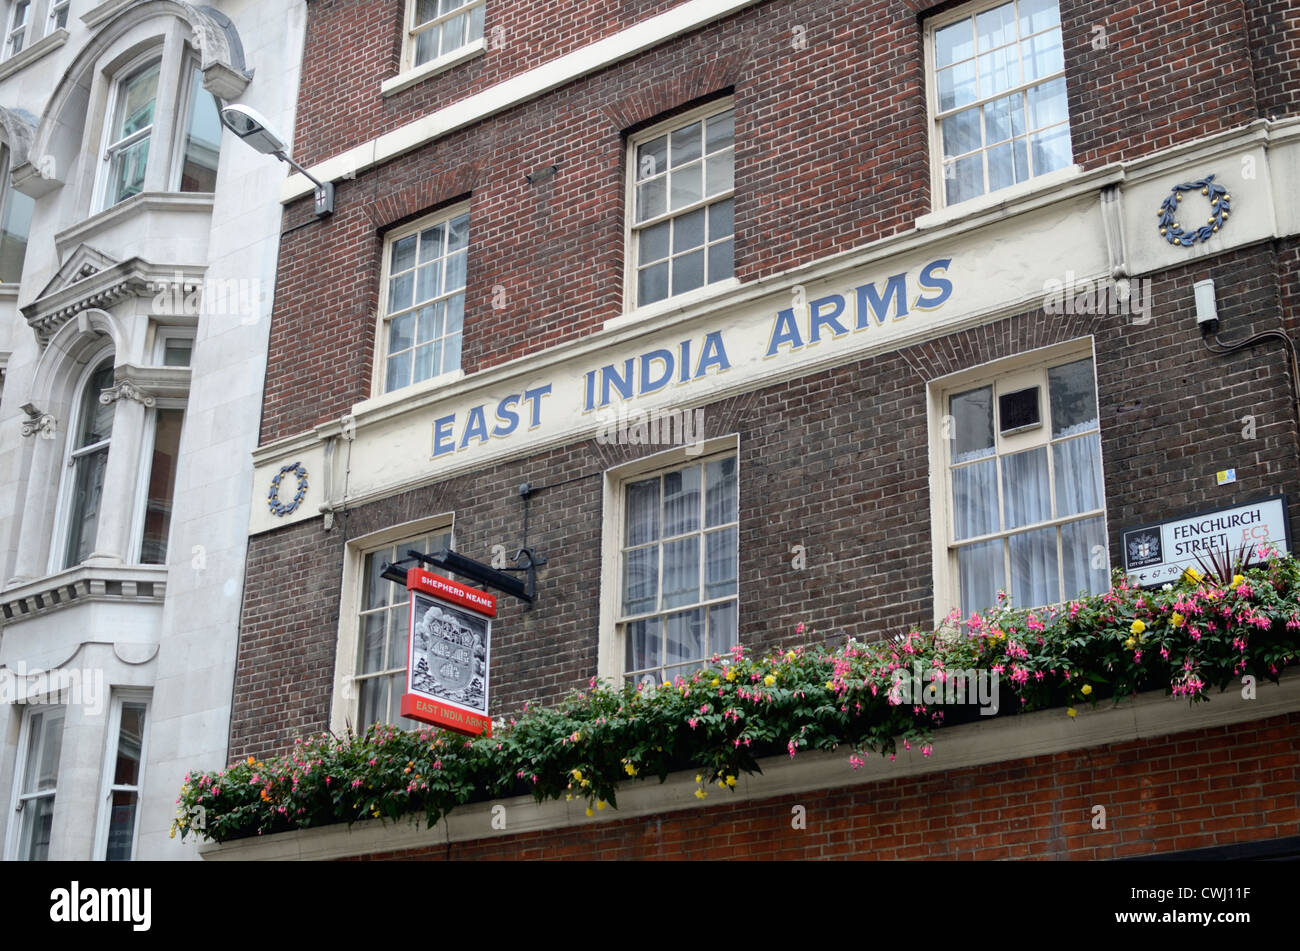 The East India Arms pub in Fenchurch Street, London, England Stock Photo